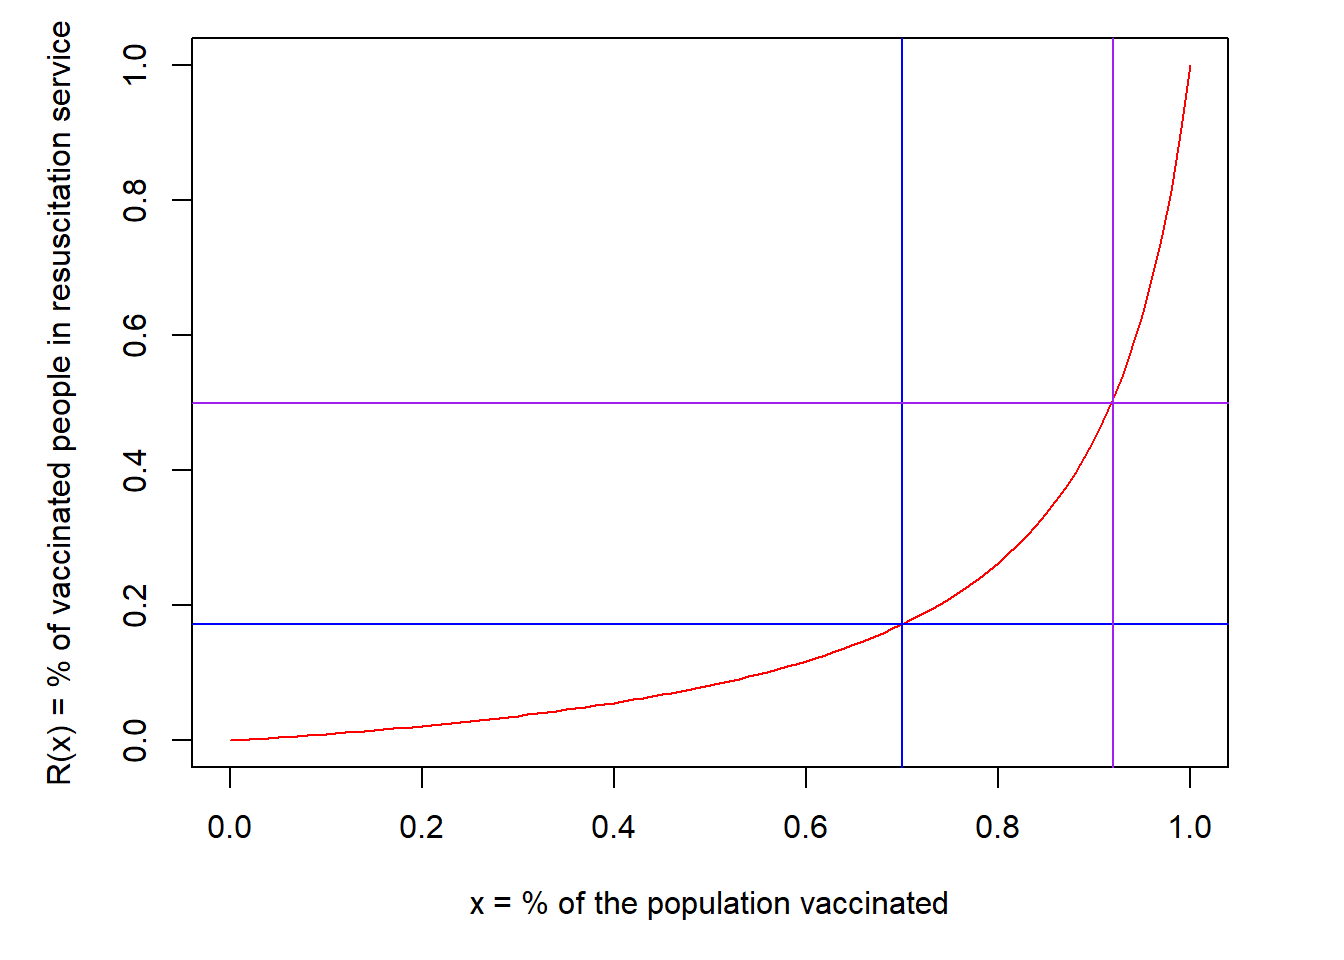 Evolution of the number of people vaccinated against Covid19 entering RS with respect to the vaccination percentage of the whole population.